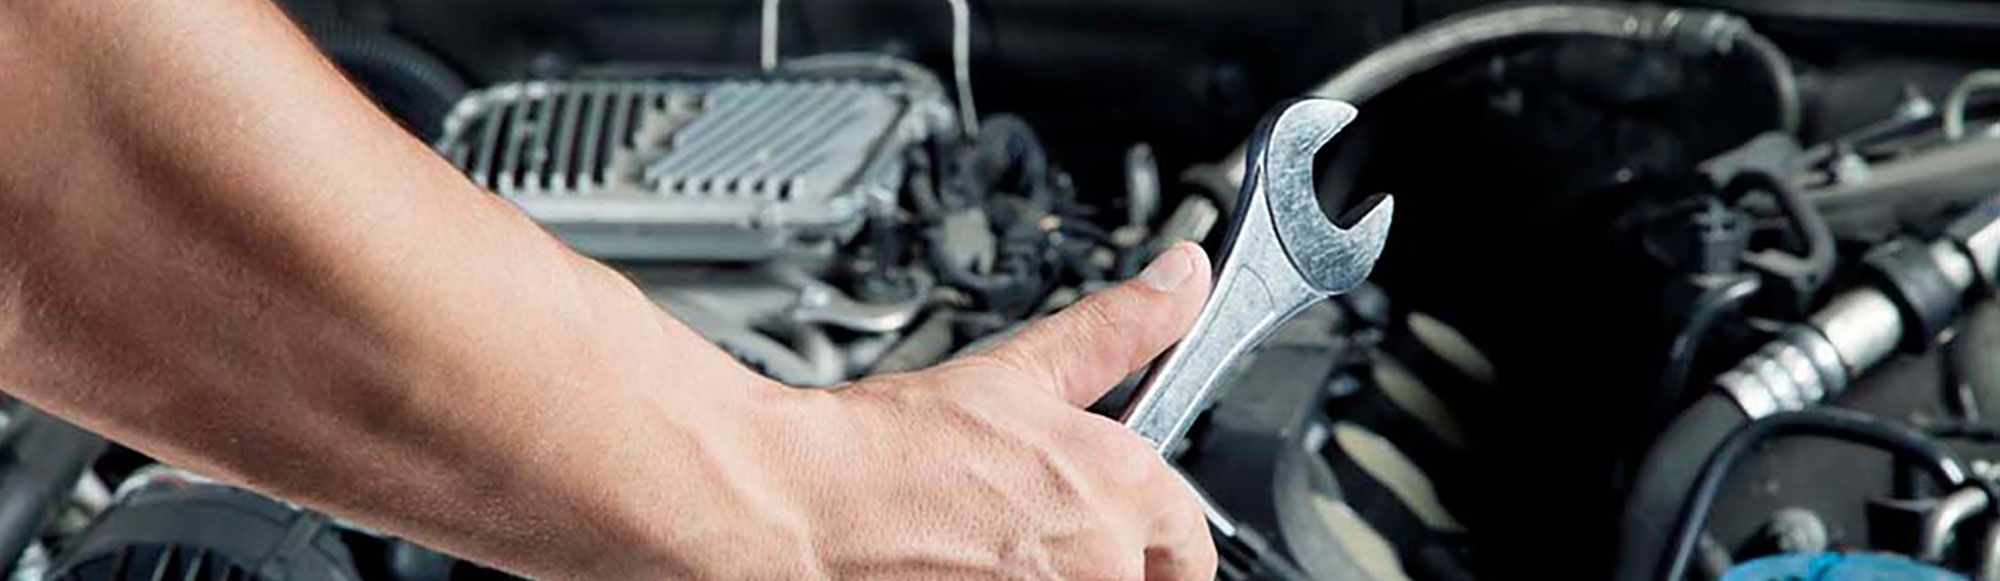 Car Servicing at Mount Automotive in Halifax